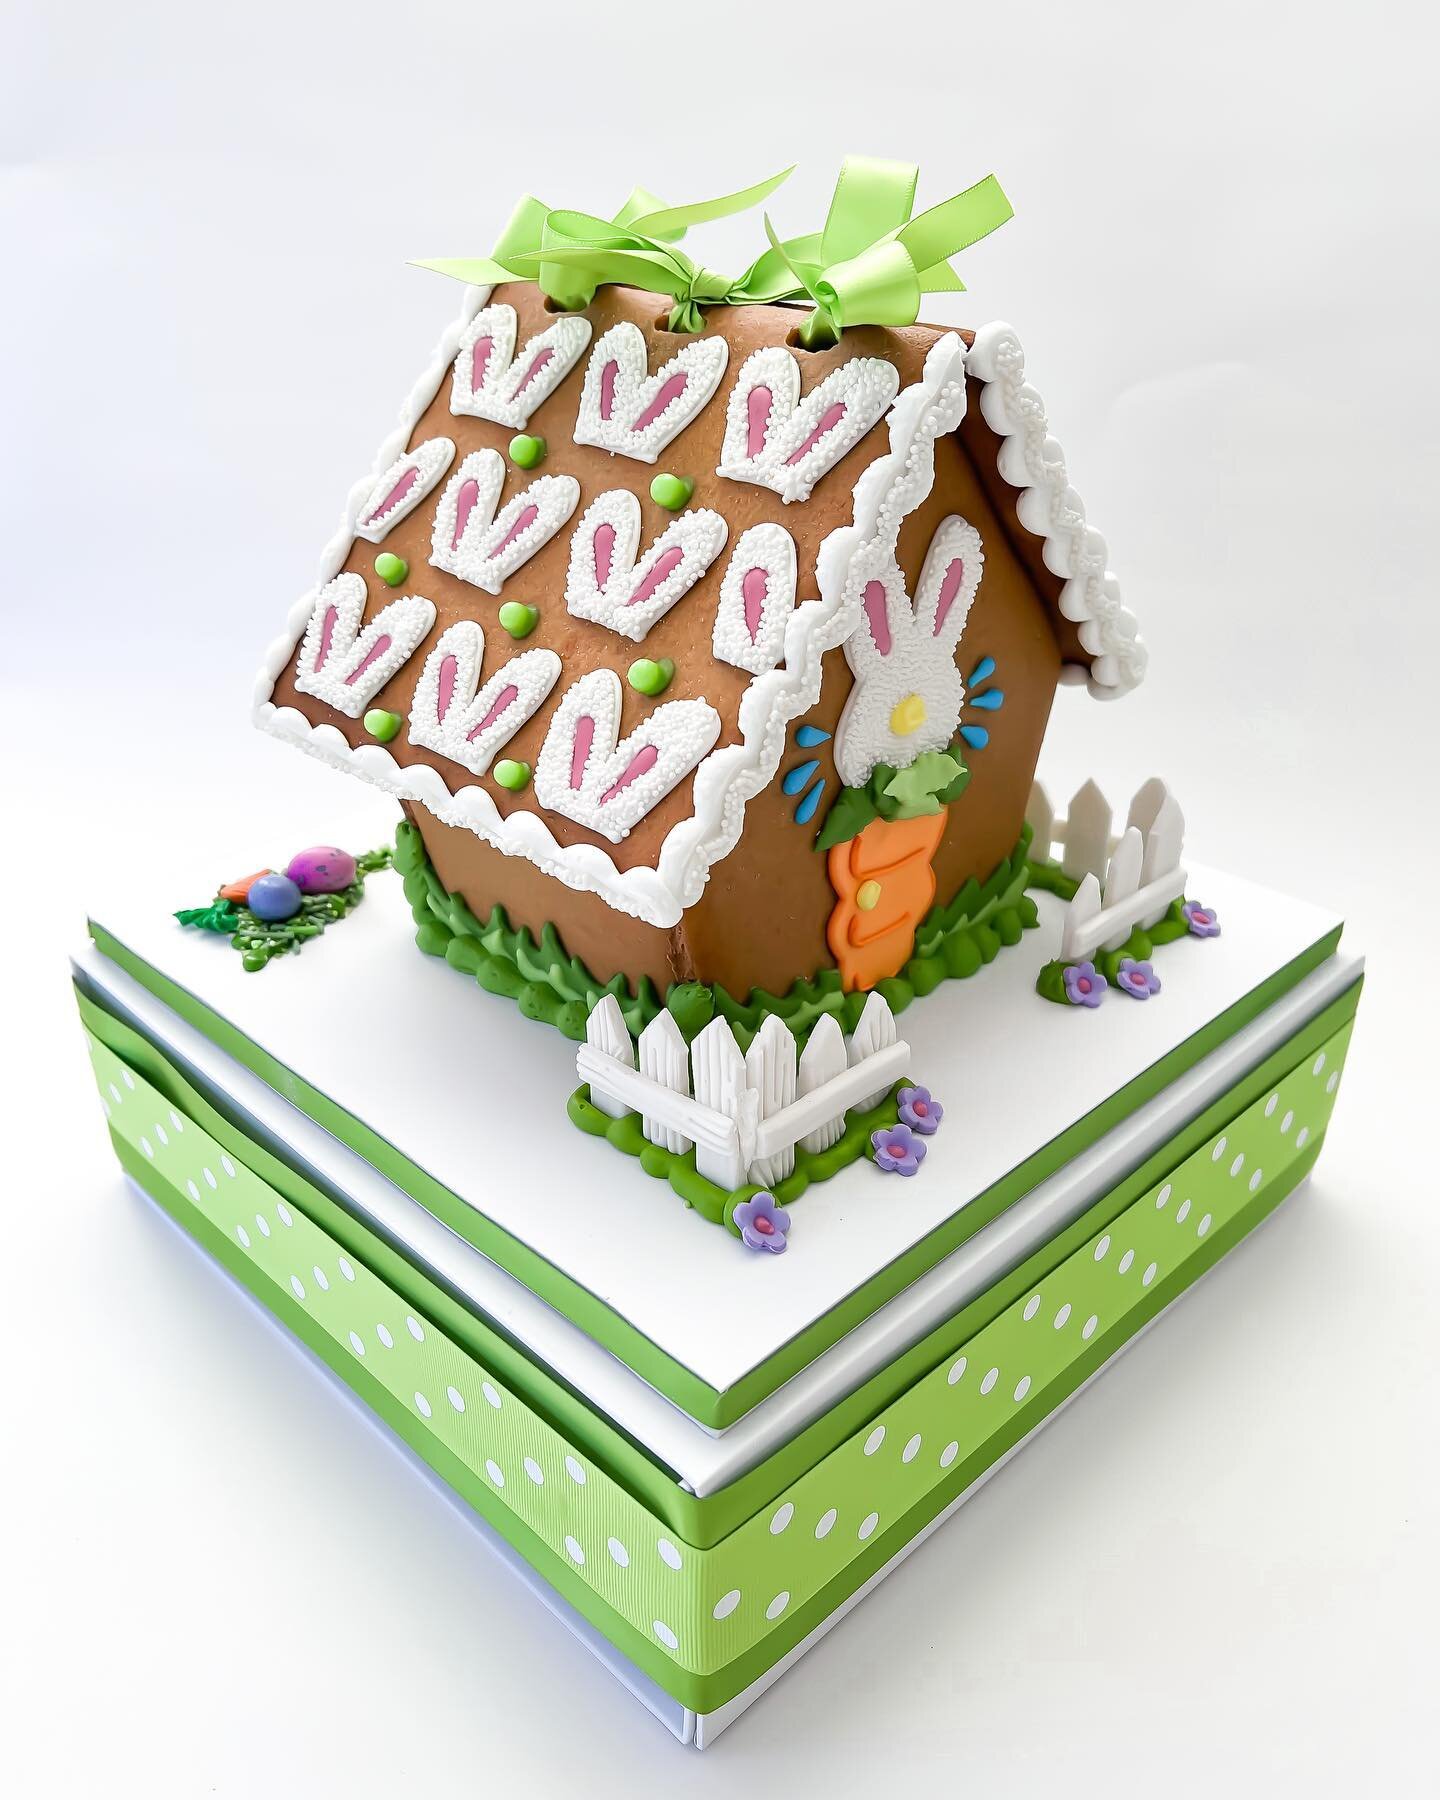 We&rsquo;re in full spring mode with our new Bunny Hutch House 🐰 It gets even better once you&rsquo;ve discovered the delicious surprise that lies inside. Shop now in the #linkinbio⁣
⁣
⁣
#edibleestates #gingerbread #gingerbreadbuilding #gingerbreadh